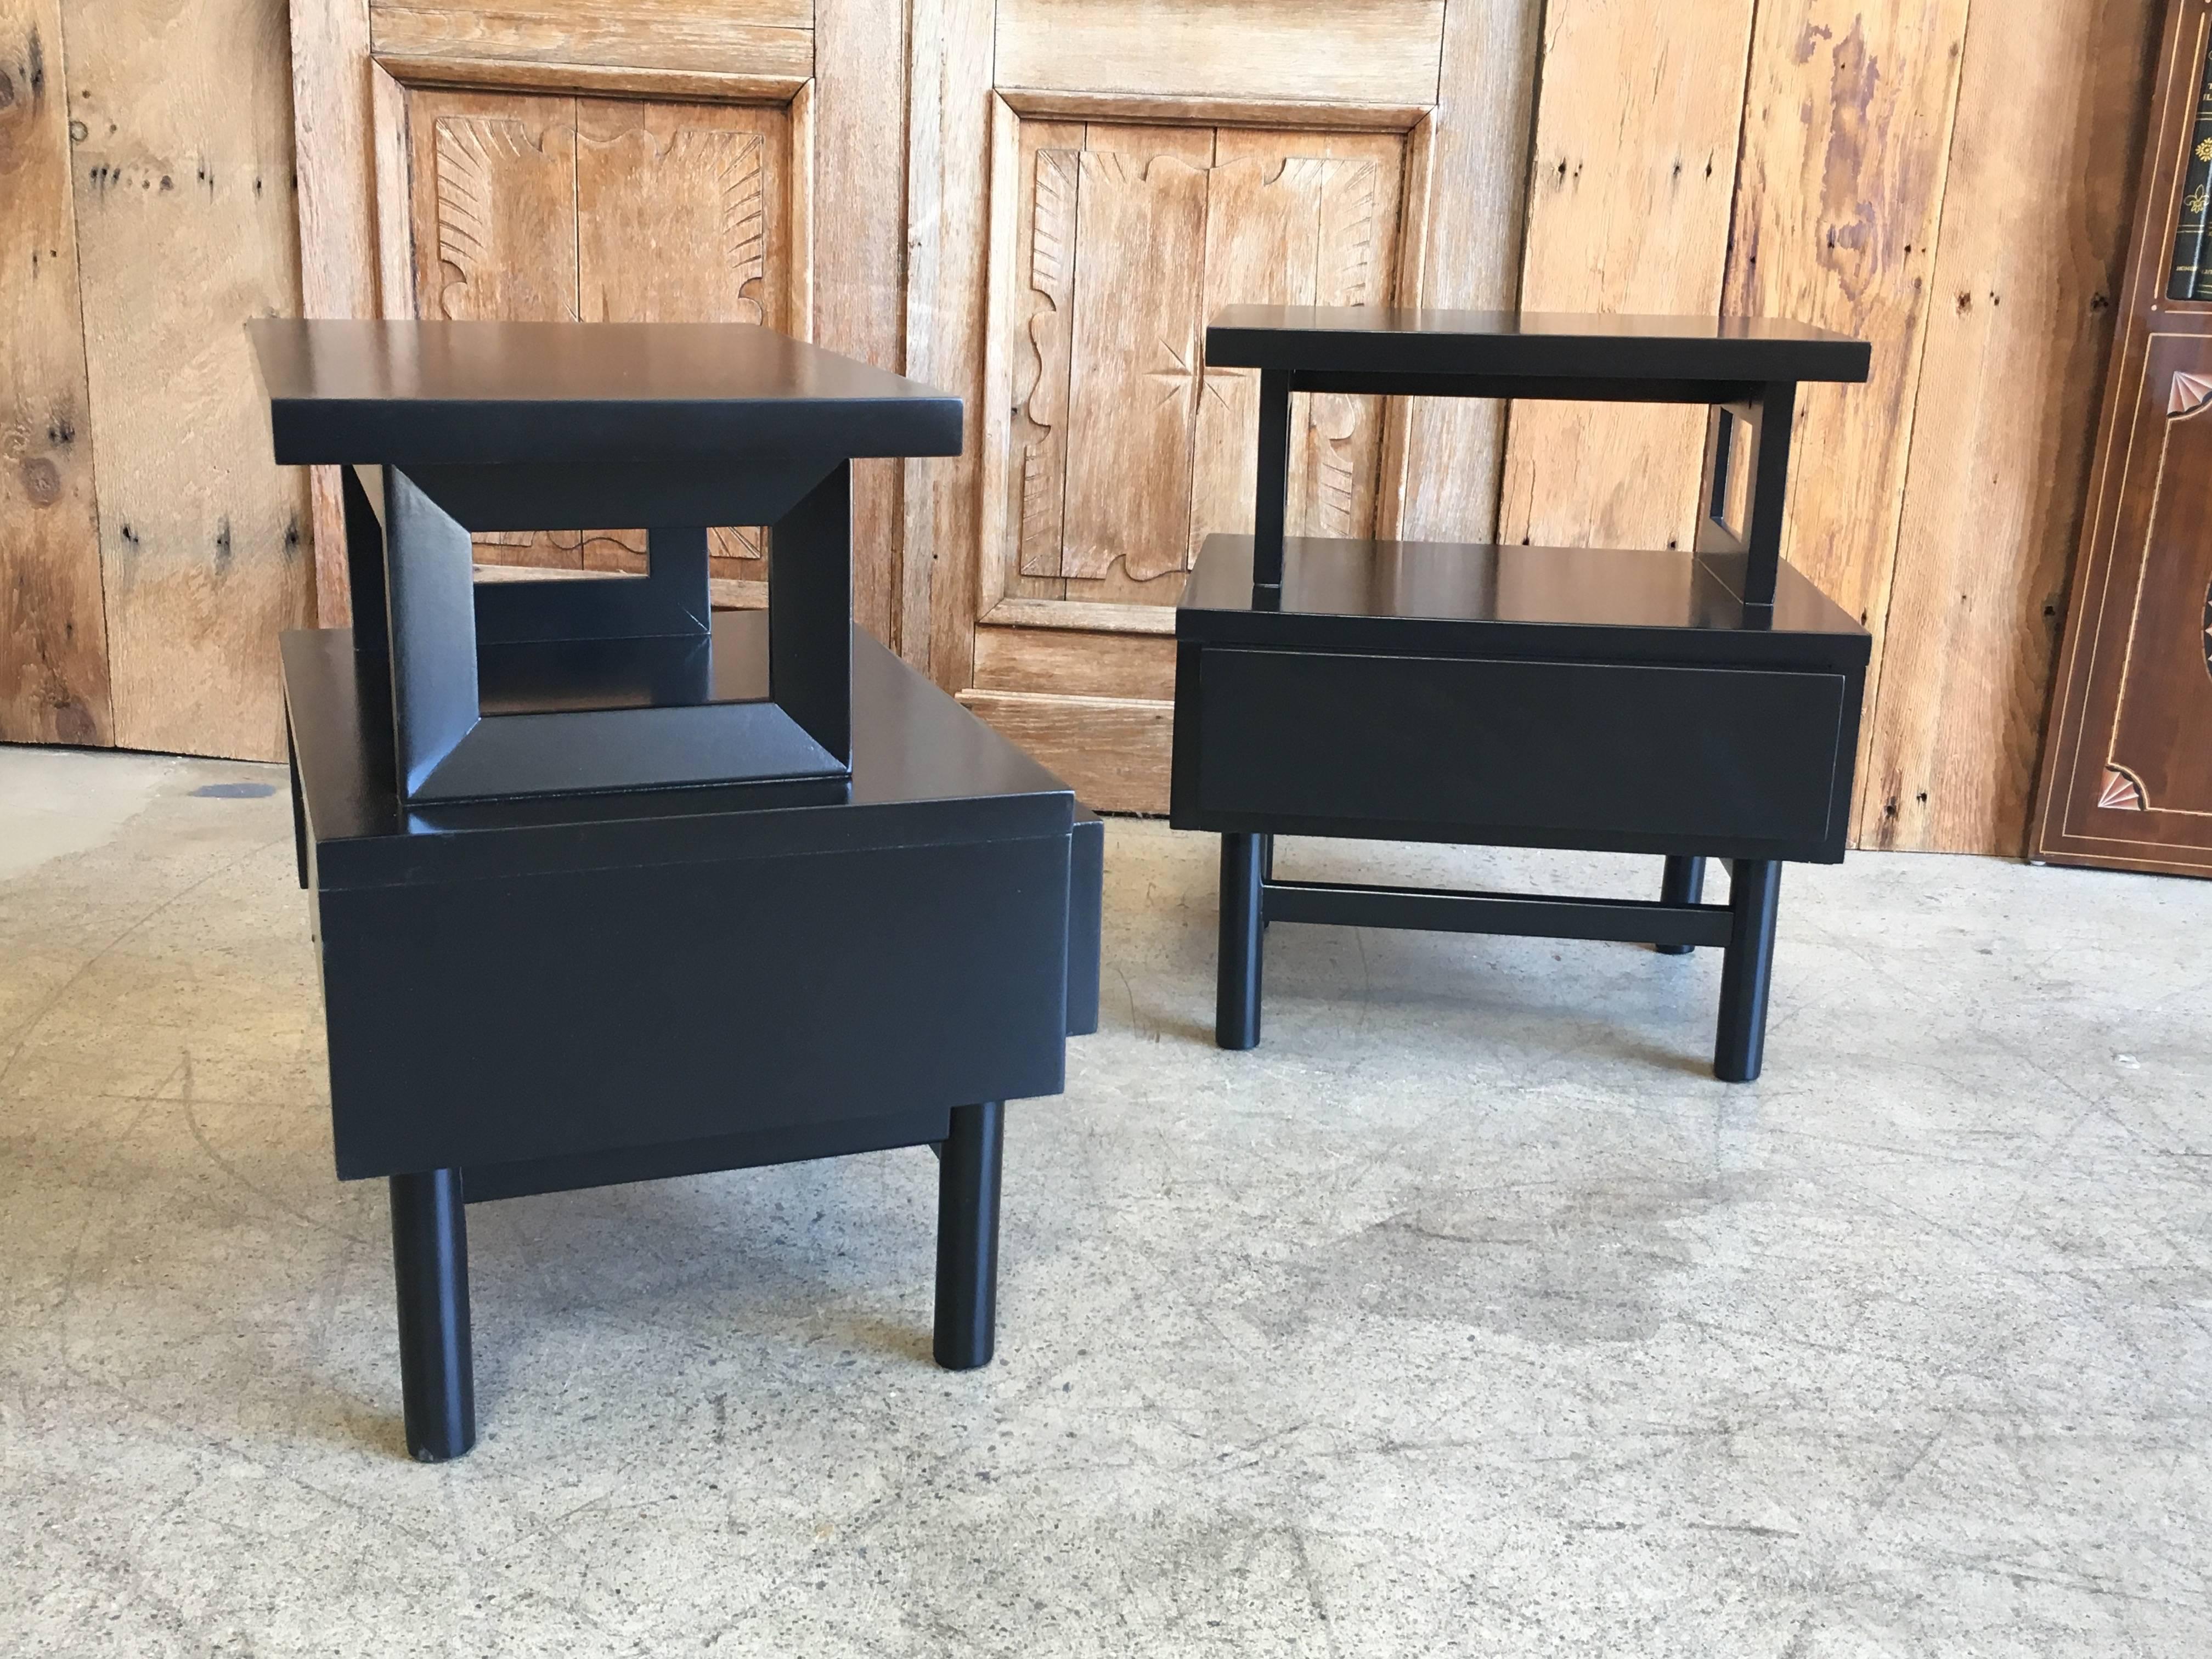 Wood Pair of 1950s Ebonized Nightstands by American of Martinsville